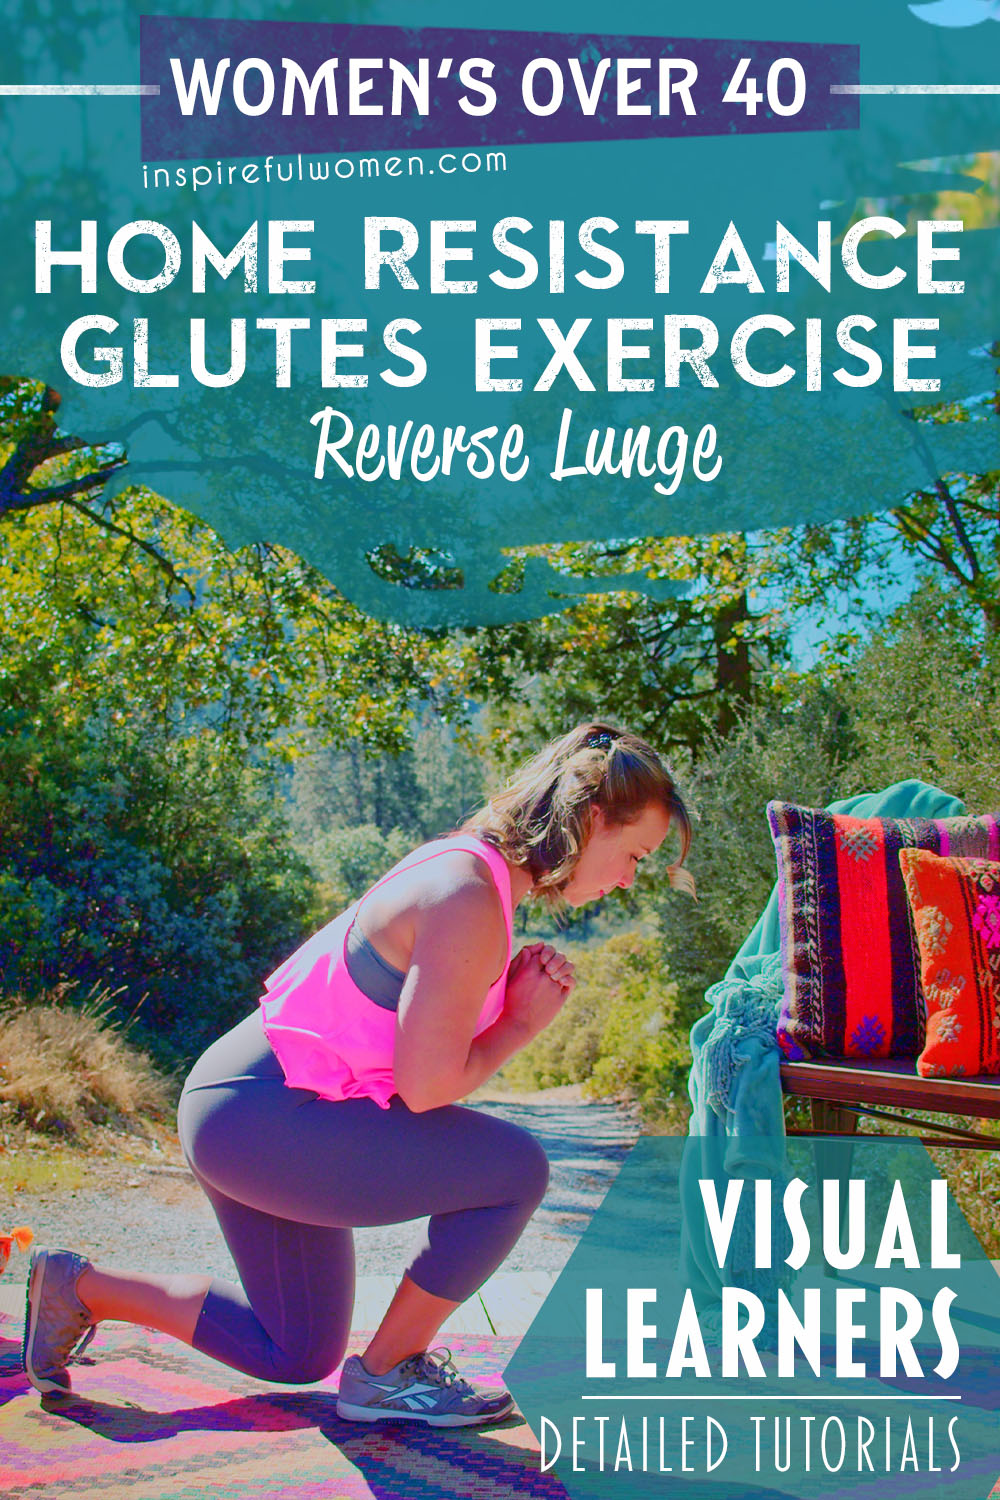 glute-focus-reverse-lunge-variation-for-bad-knees-gluteus-maximus-exercise-at-home-women-over-40